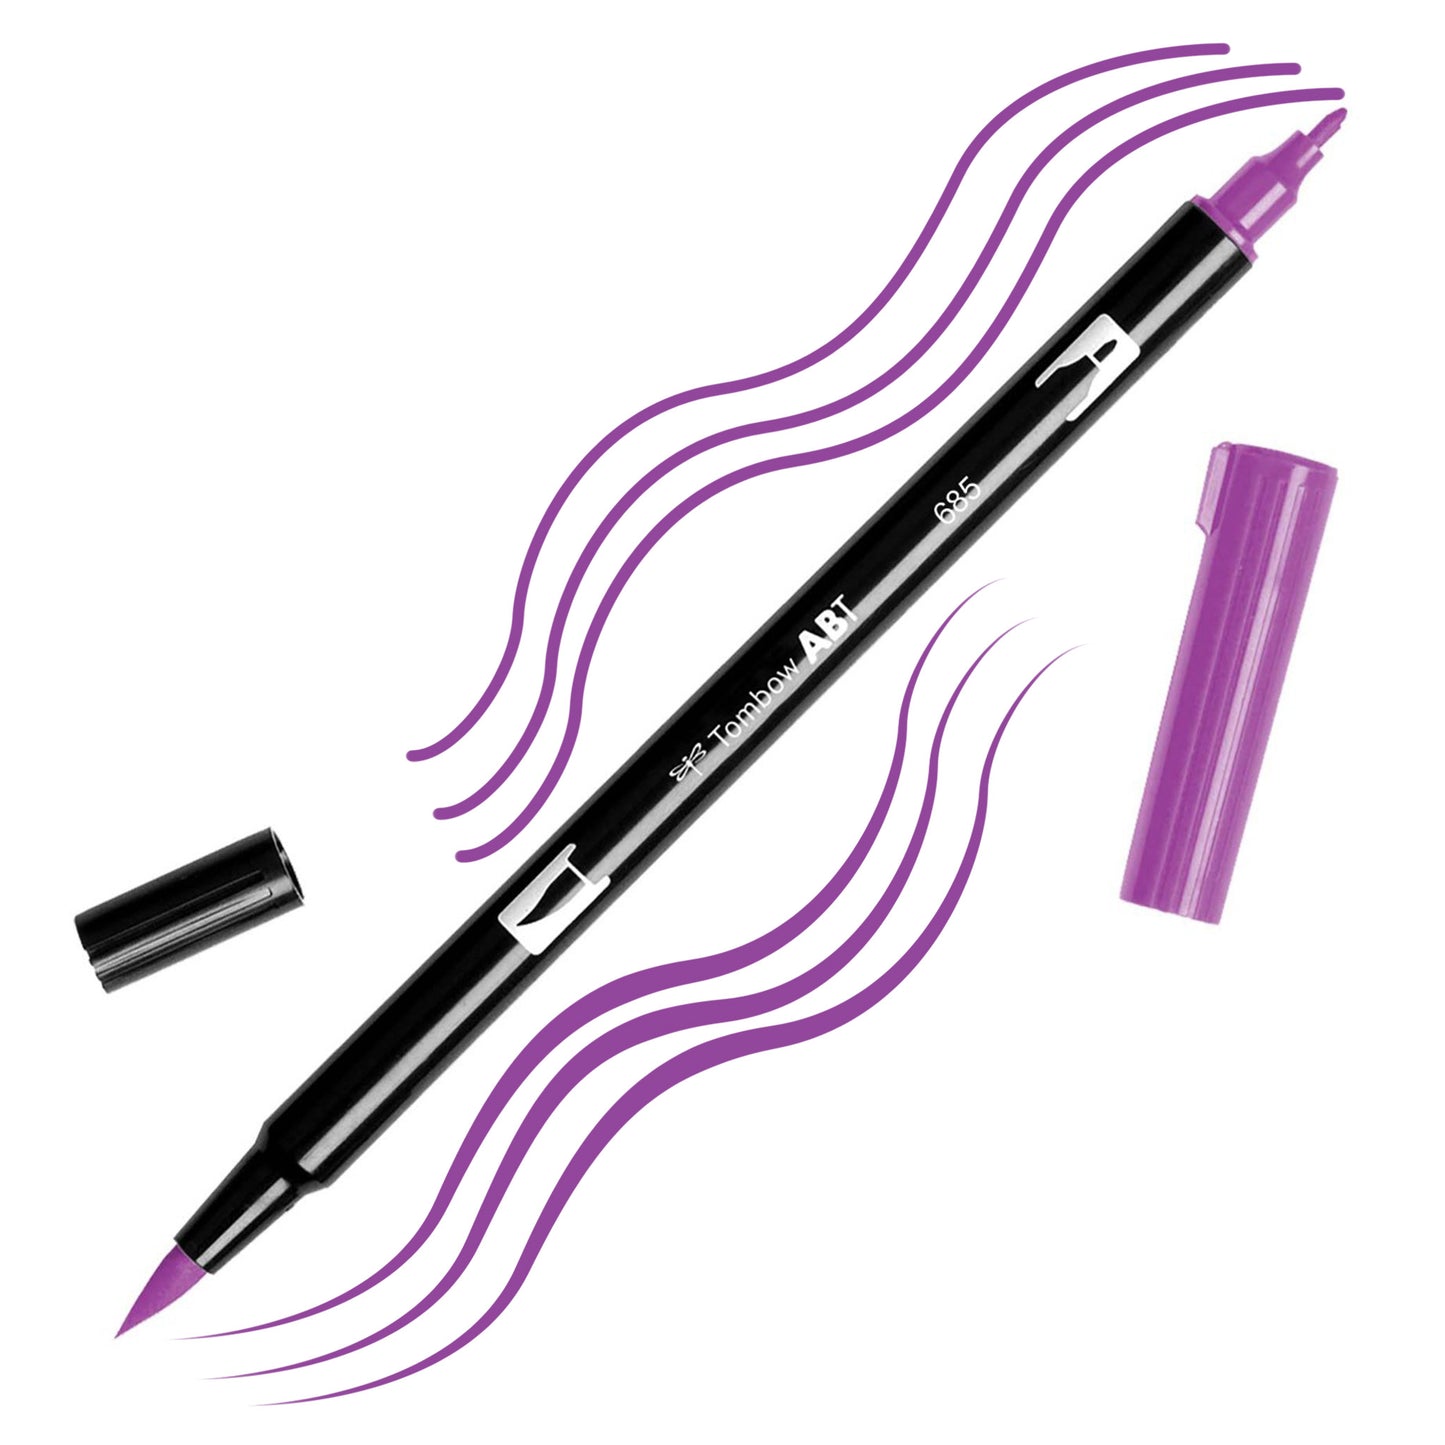 Deep Magenta Tombow double-headed brush-pen with a flexible nylon fiber brush tip and a fine tip against a white background with Deep Magenta strokes